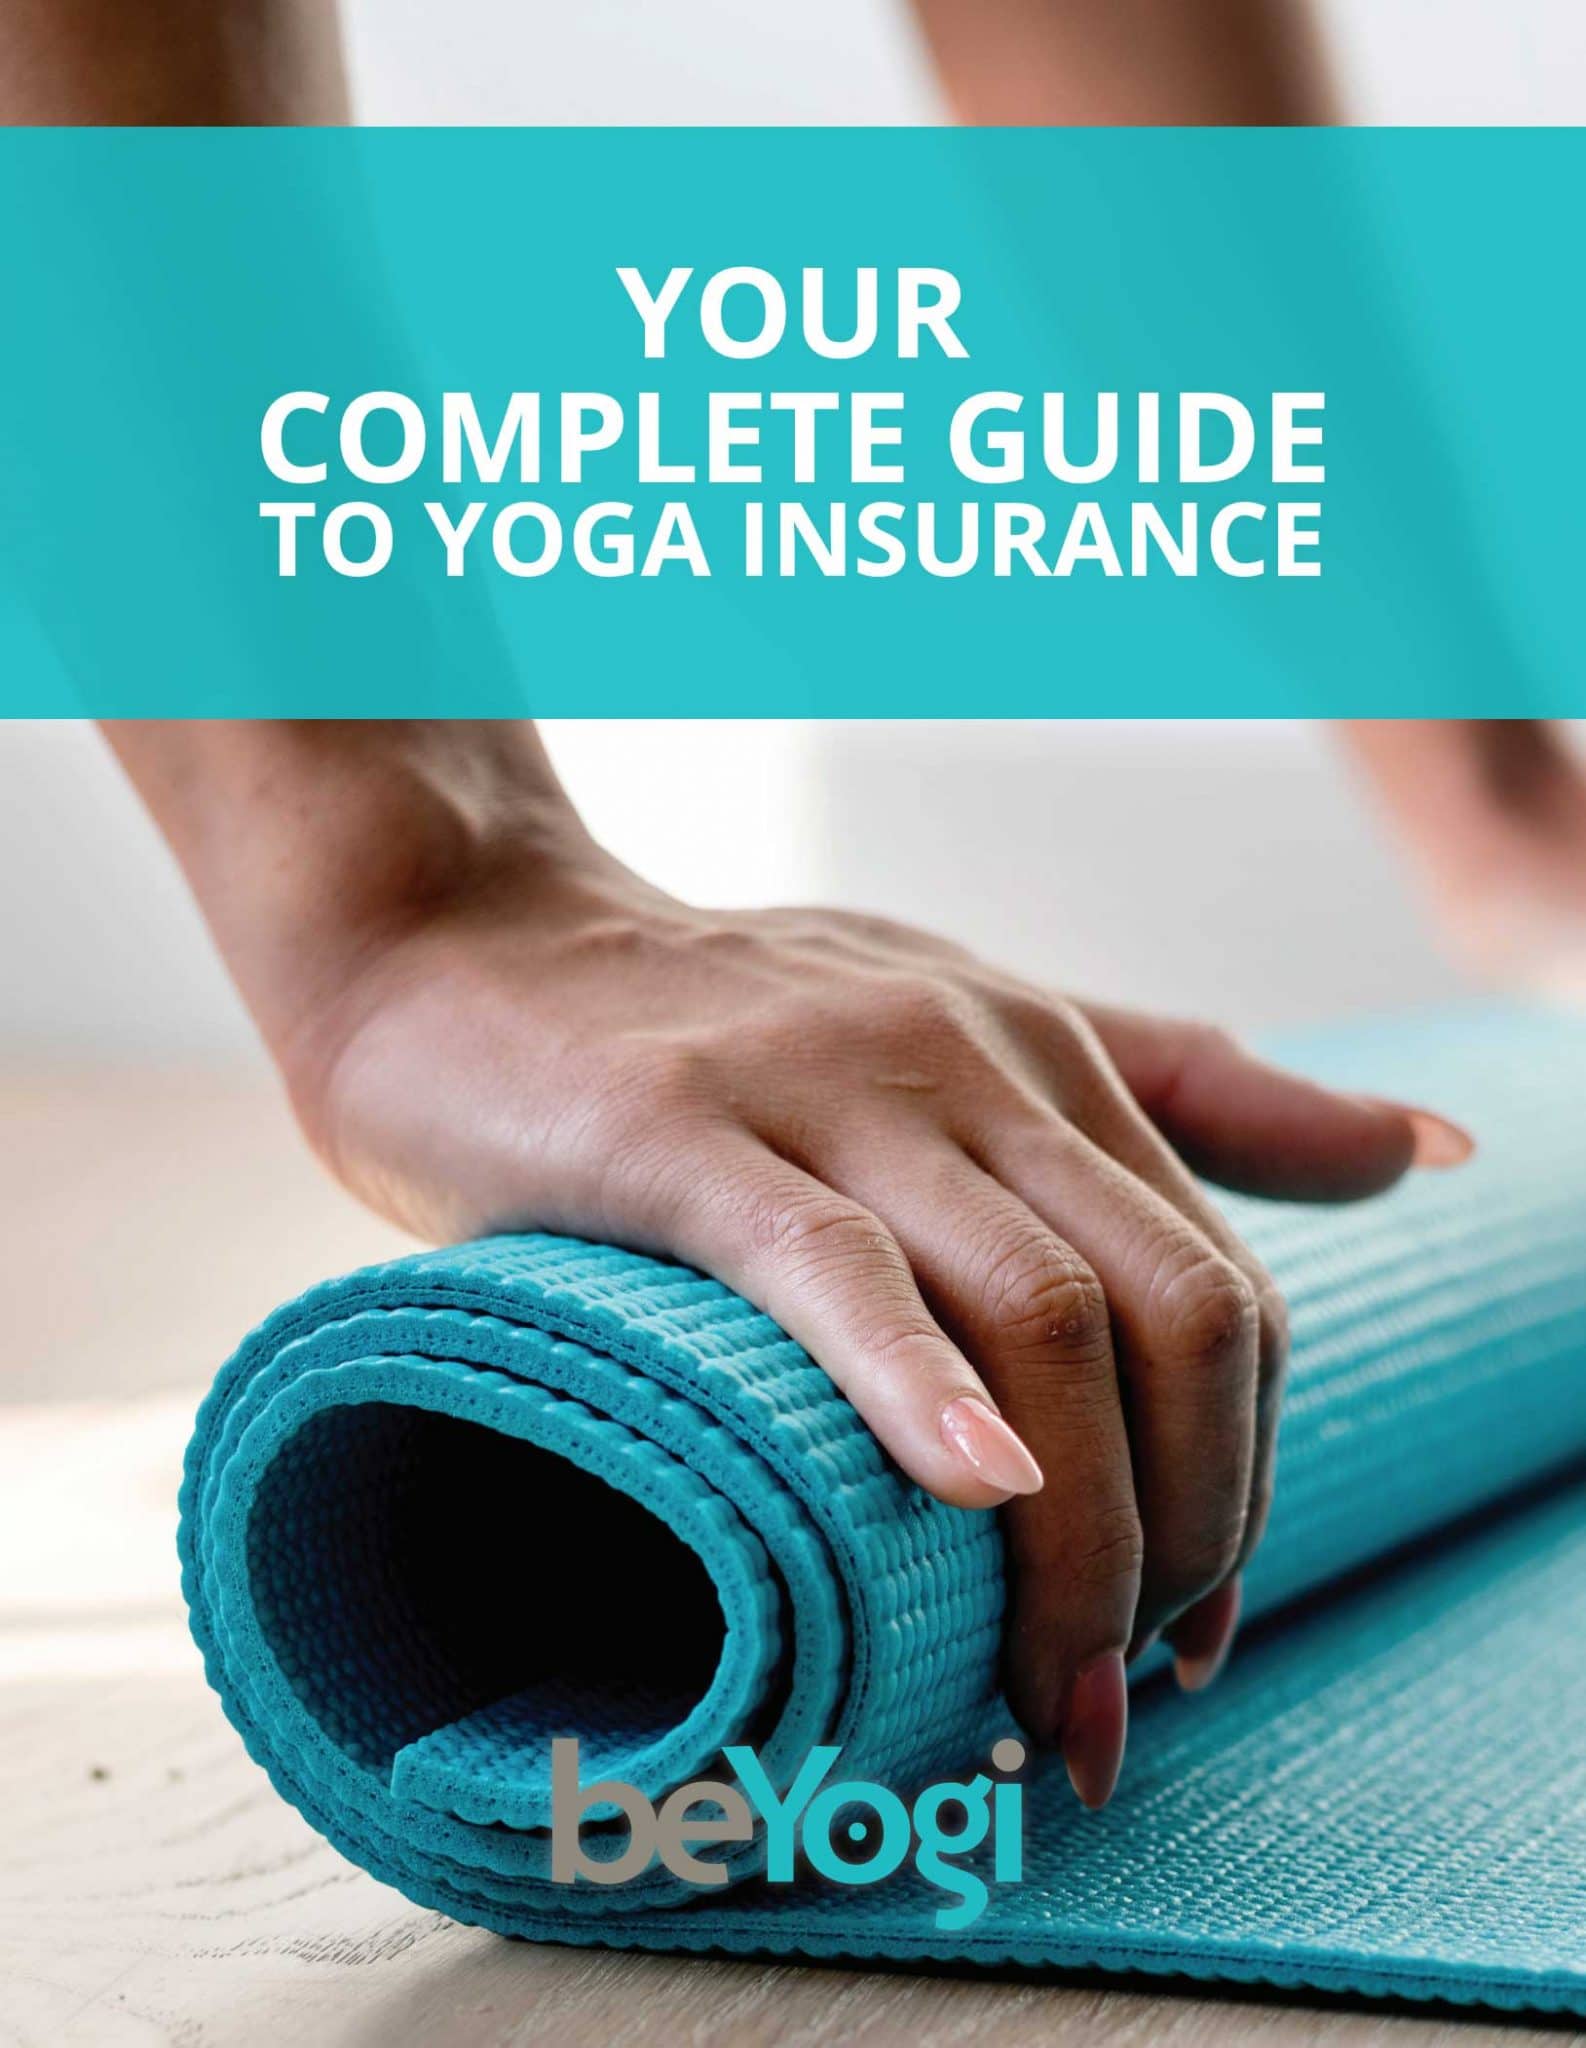 Your Complete Guide to Yoga Insurance